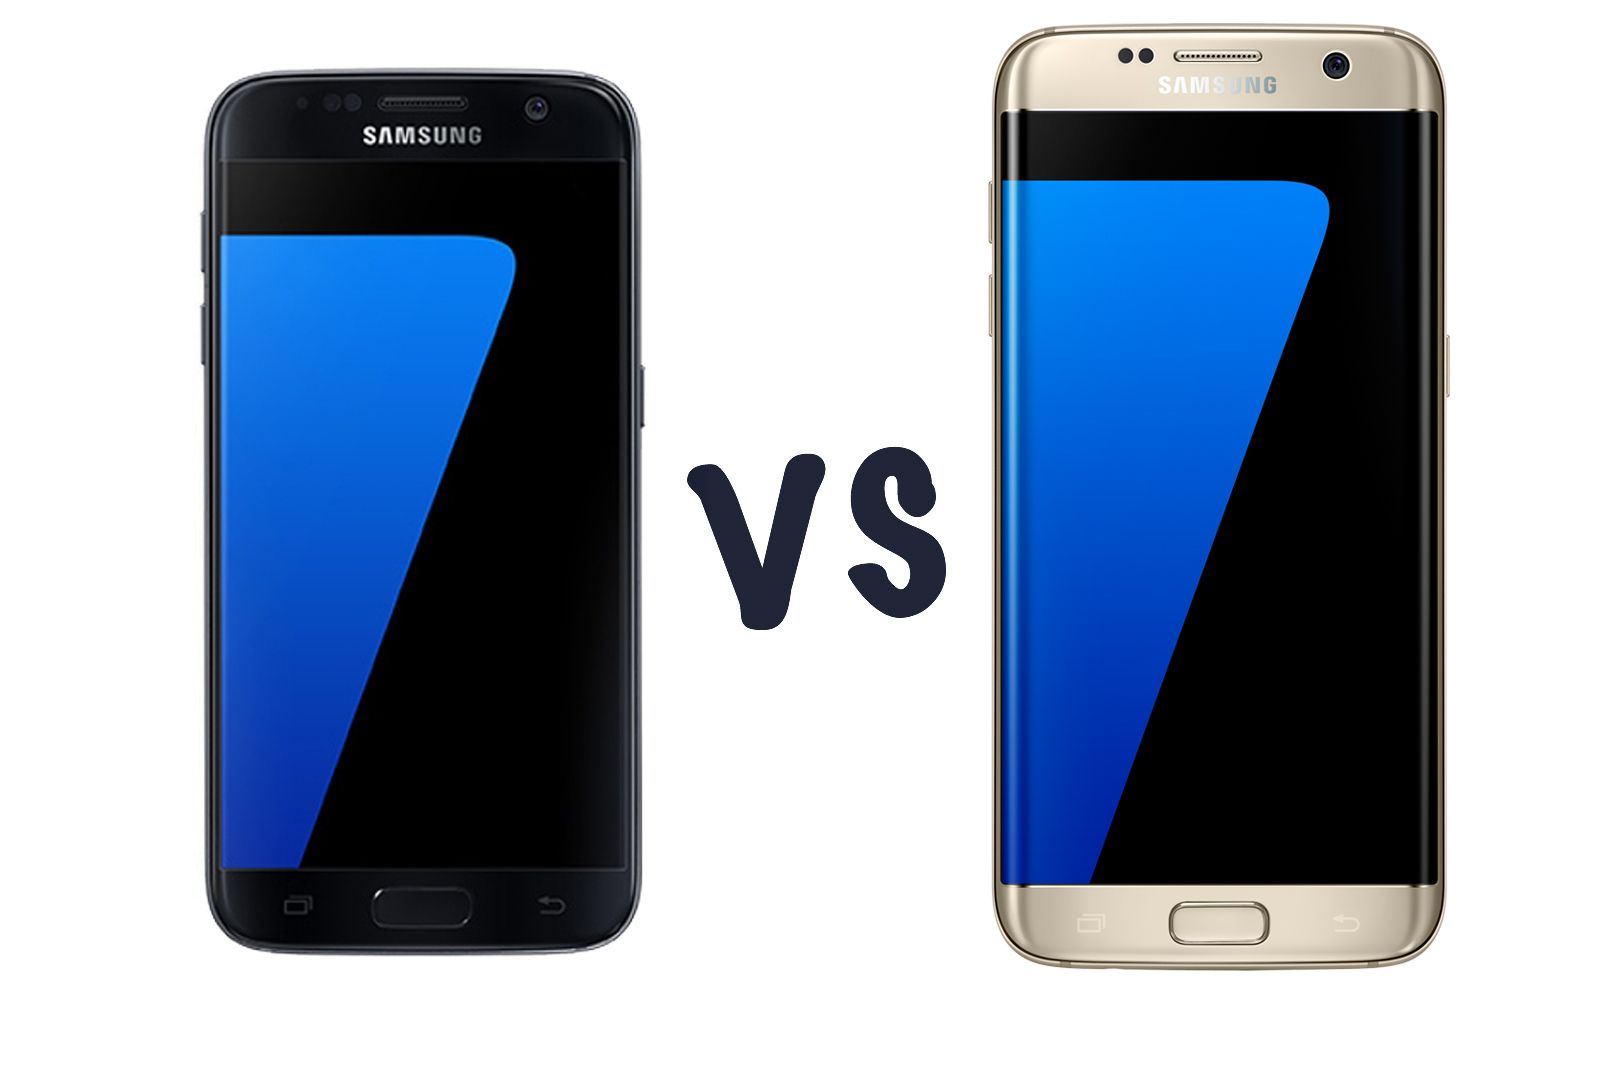 samsung galaxy s7 vs galaxy s7 edge which should you choose  image 1